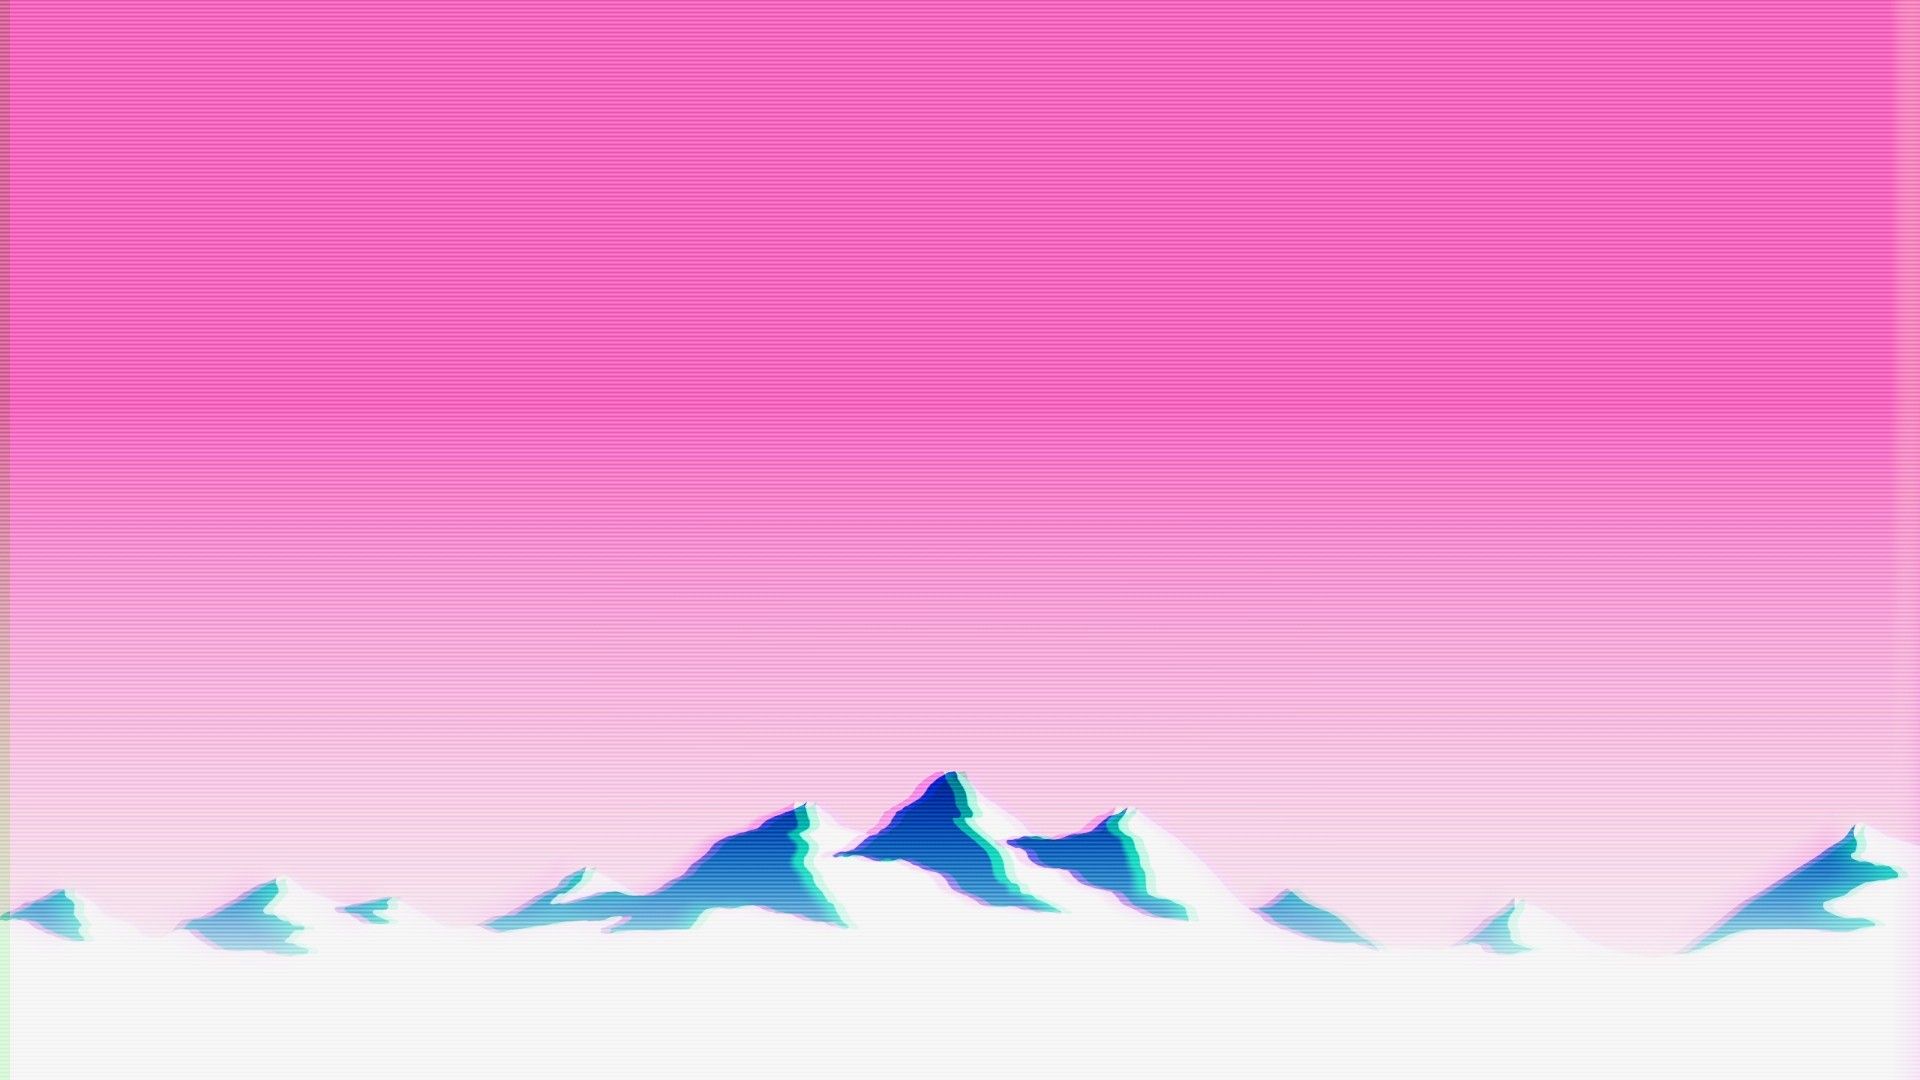 Vaporwave wallpaper 1920x1080Download free awesome full HD